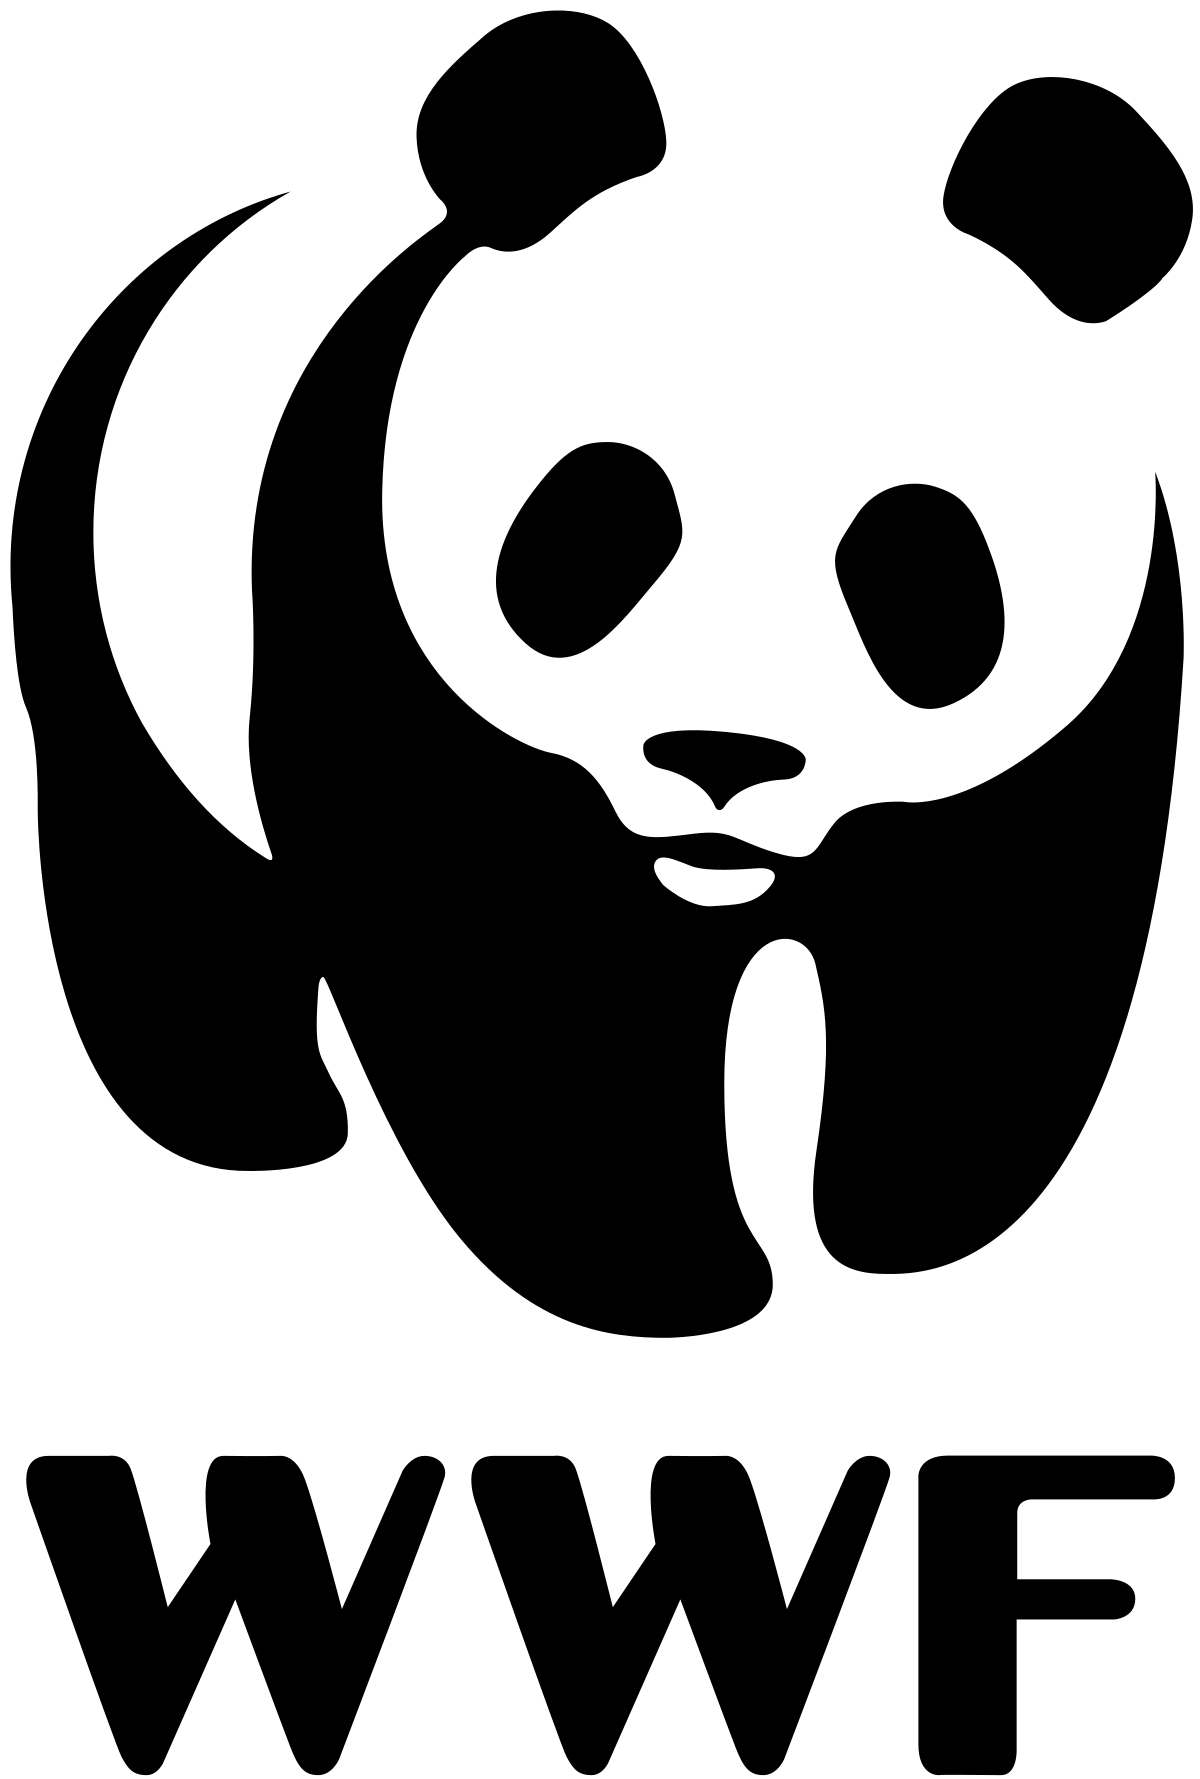 https://www.globalgoals-forum.org/wp-content/uploads/2019/08/1200px-WWF_logo.svg_.png